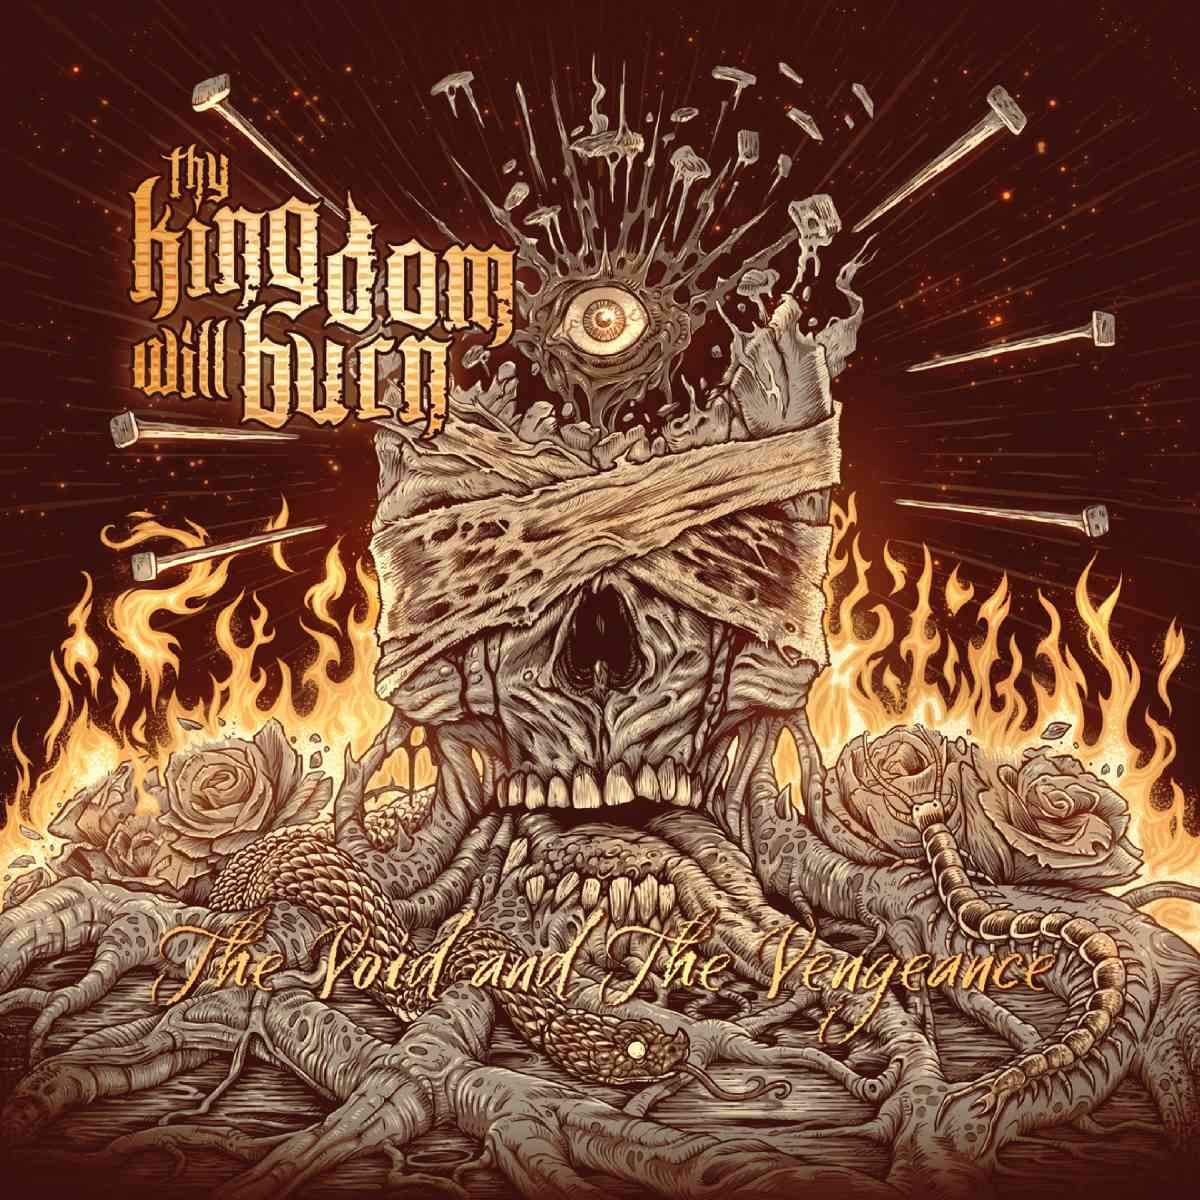 THY KINGDOM WILL BURN - The Void And The Vengeance - album cover